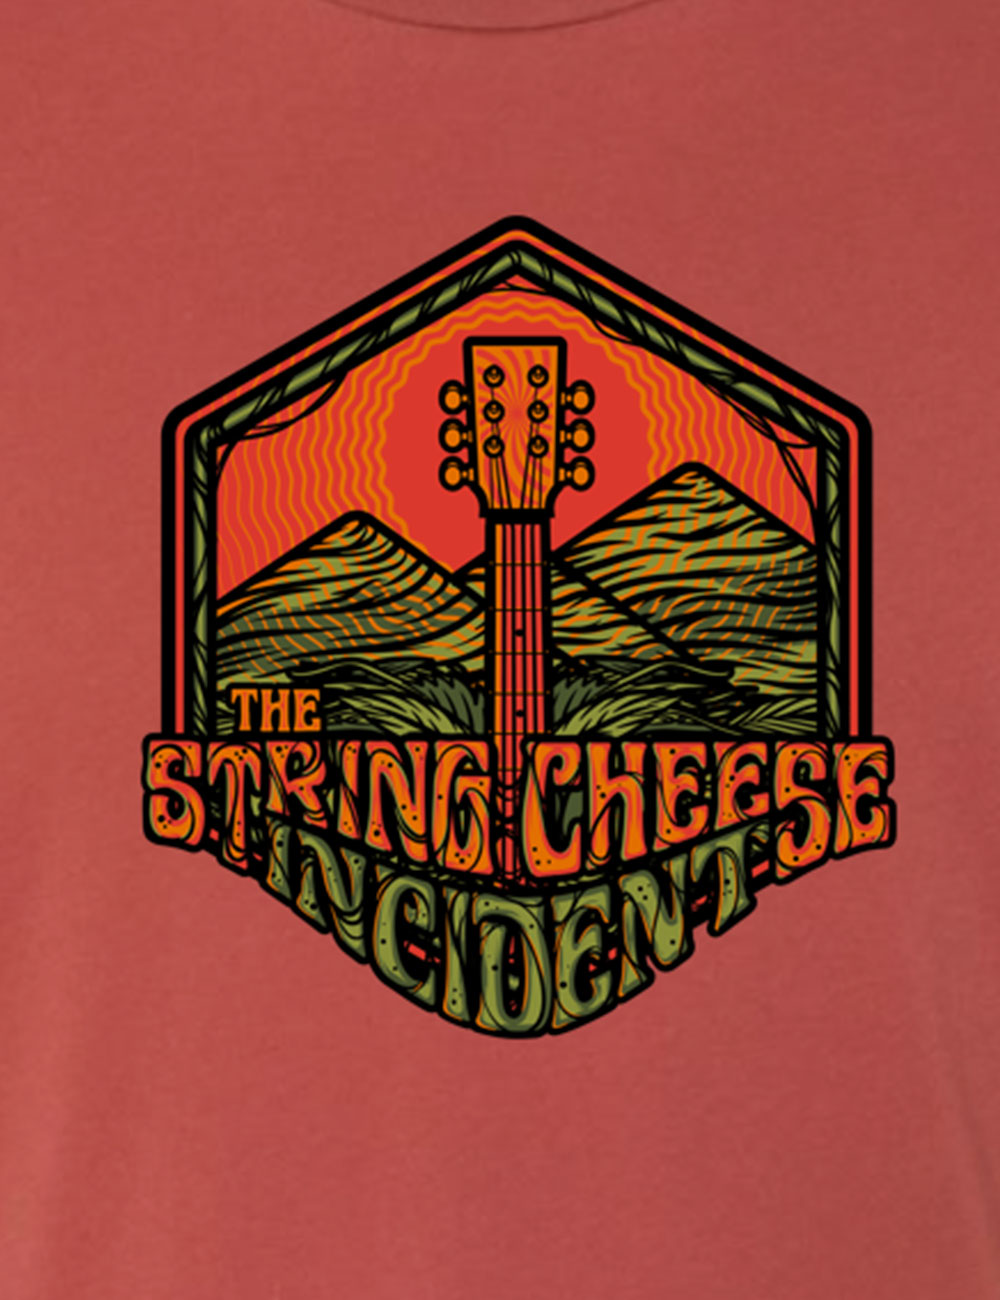 The String Cheese Incident - T-shirts- Mountain Guitar Rust